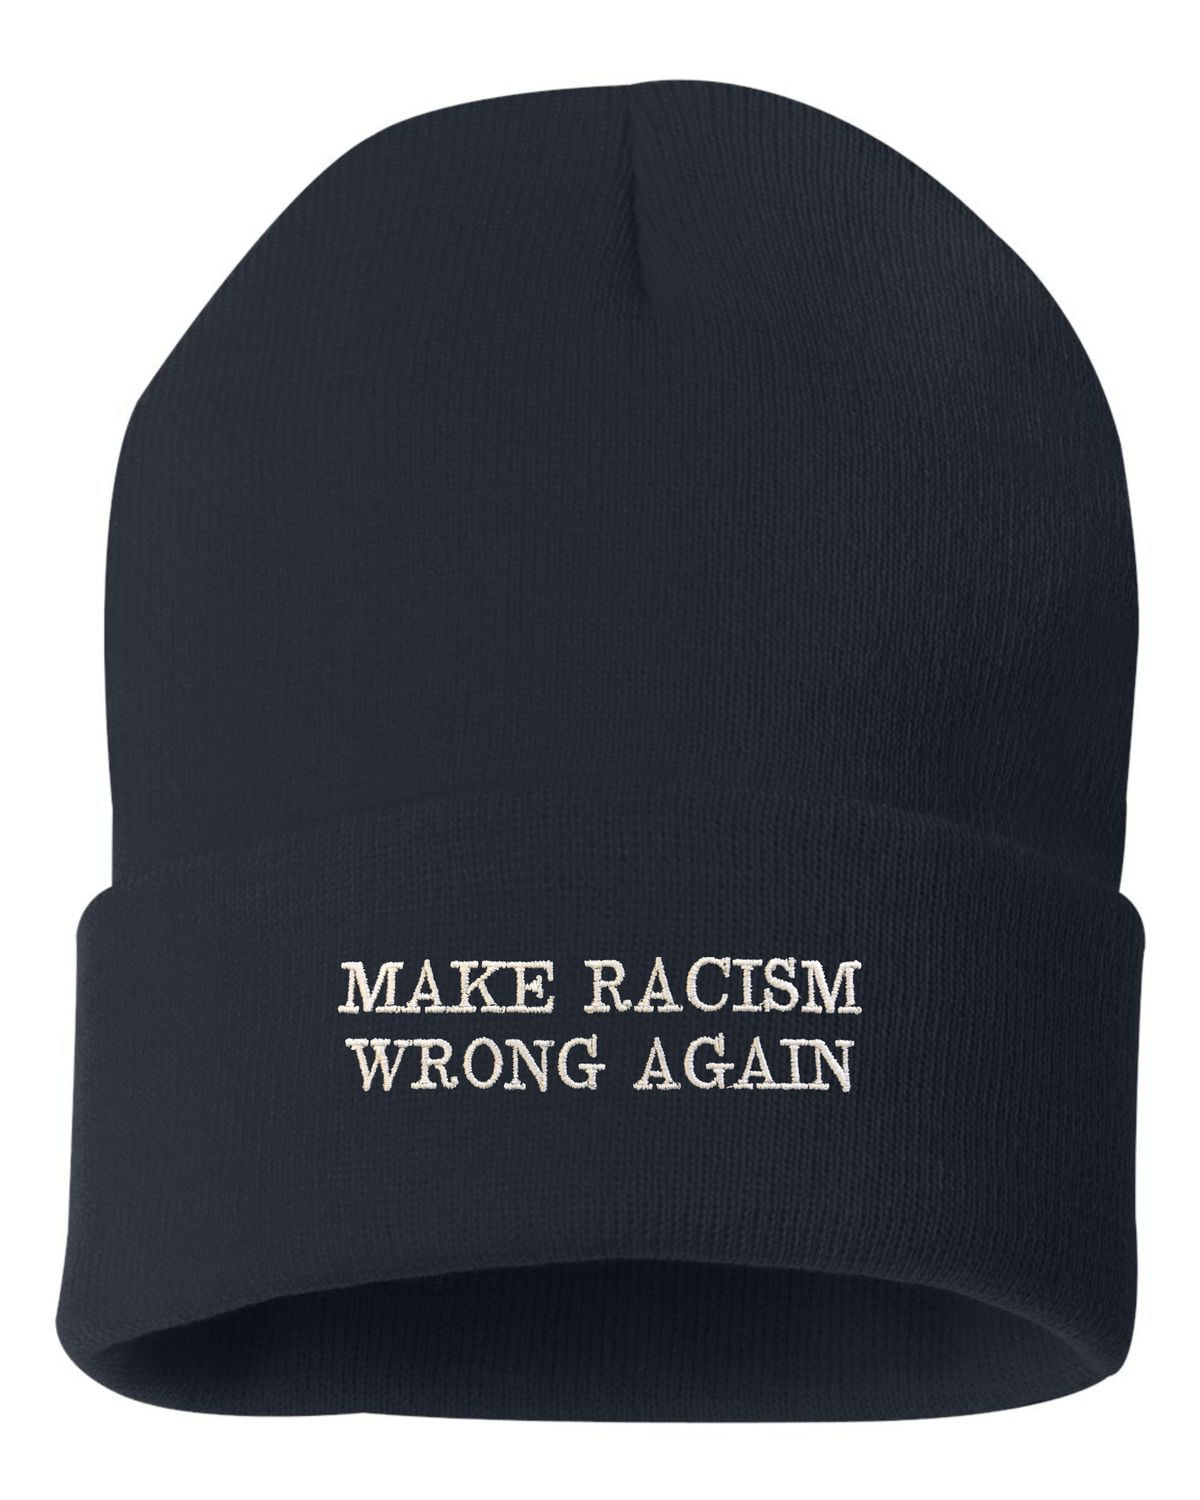 Make Racism Wrong Again Unisex Knitted Hat Stretchy Skull Cap 